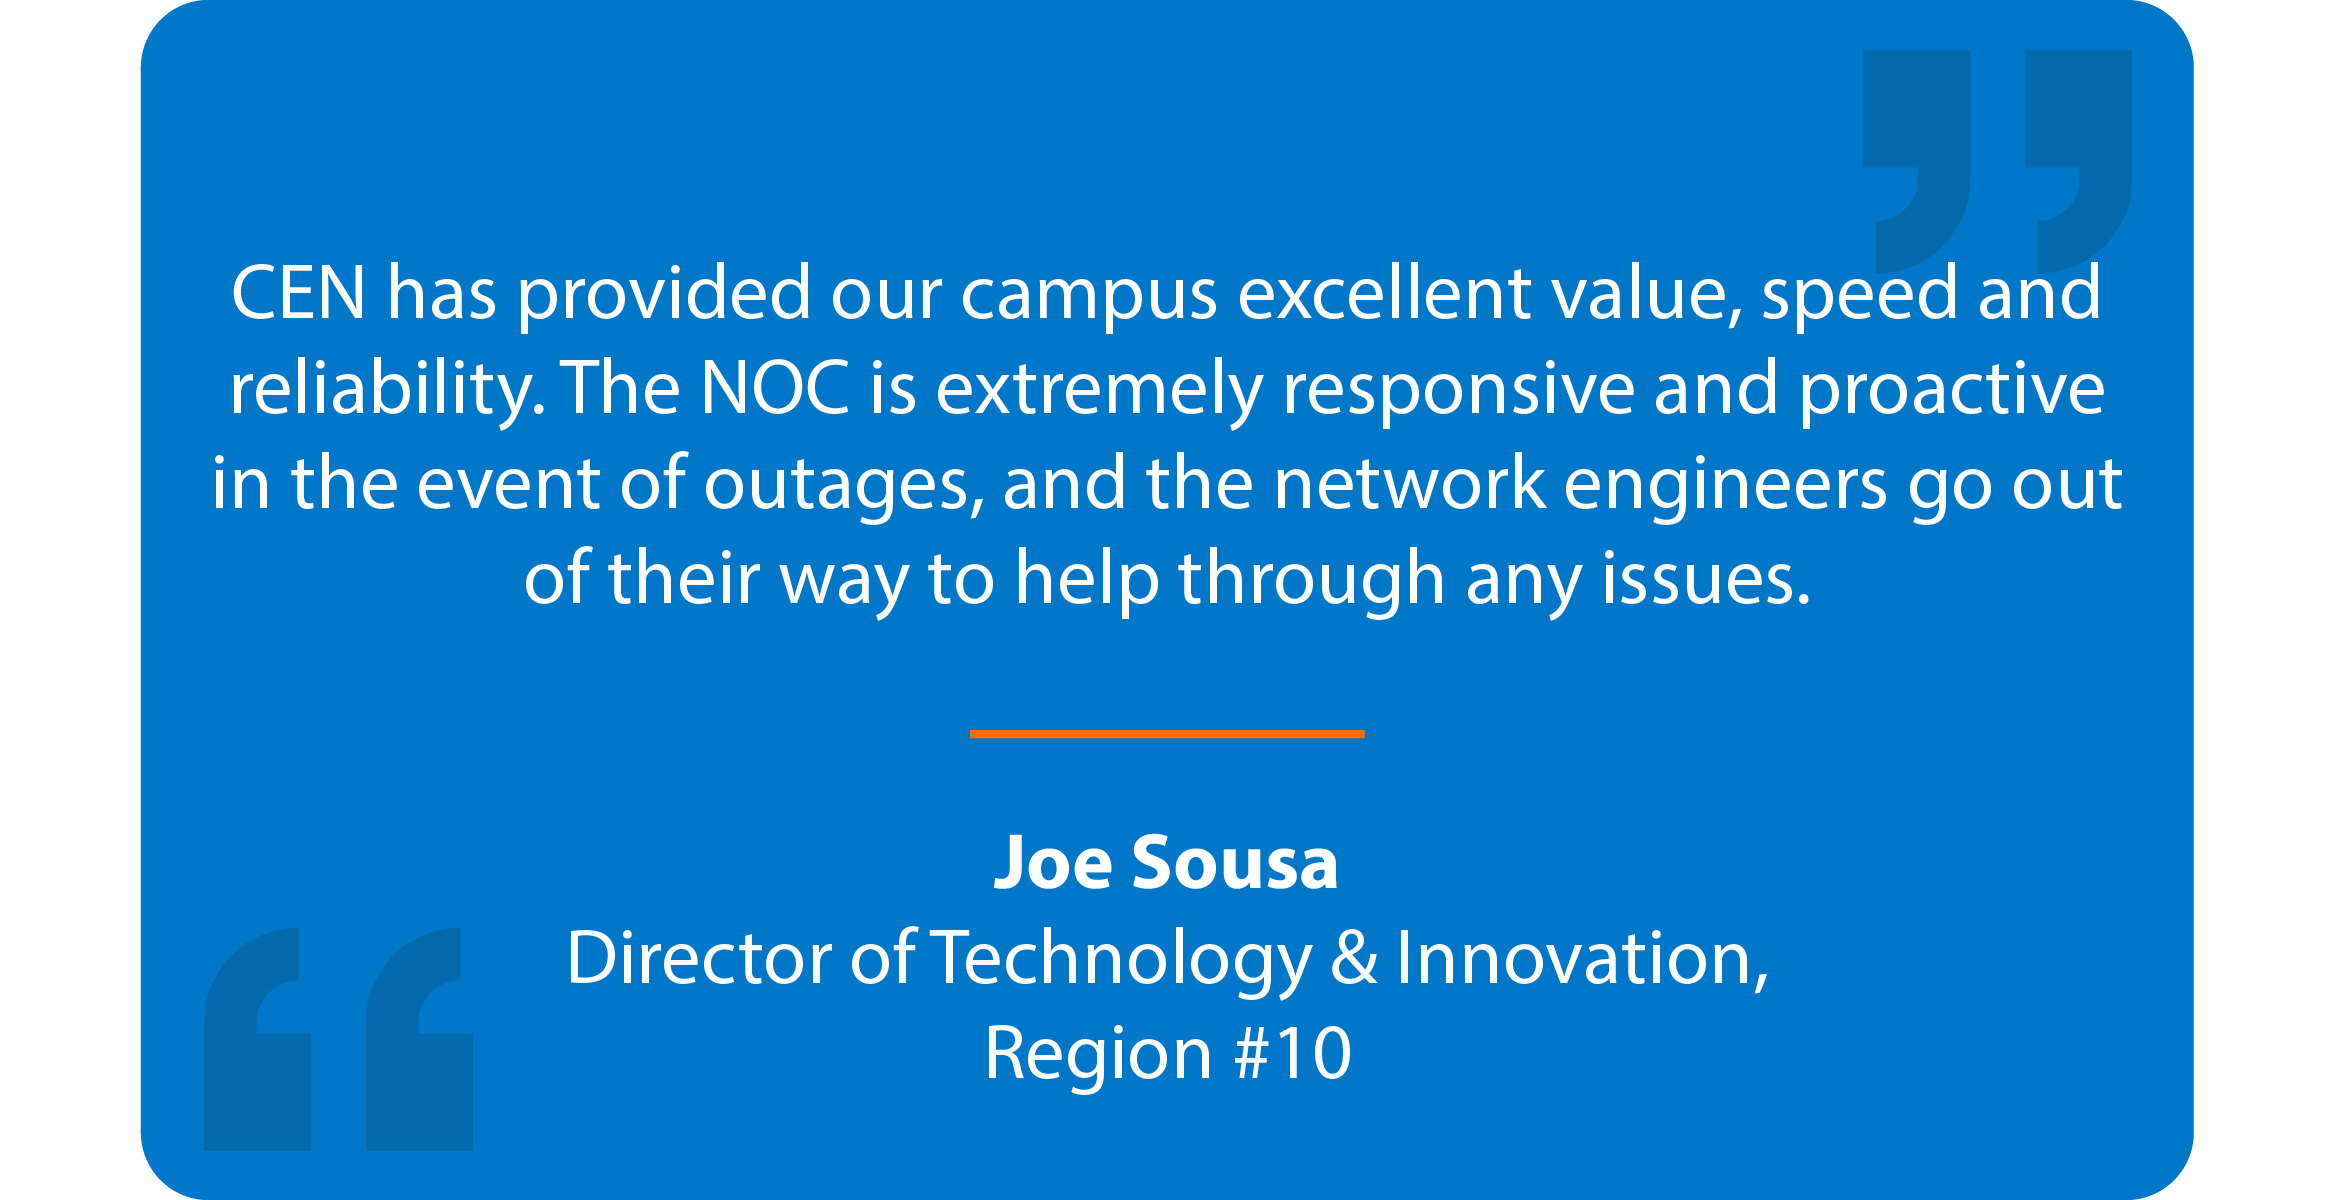 Blue box with a quote that reads: CEN has provided our campus excellent value, speed, and reliability. The NOC is extremely responsive and proactive in the event of outages, and the network engineers go out of their way to help through any issues. Joe Sousa, Director of Technology and Innovation, Region #10